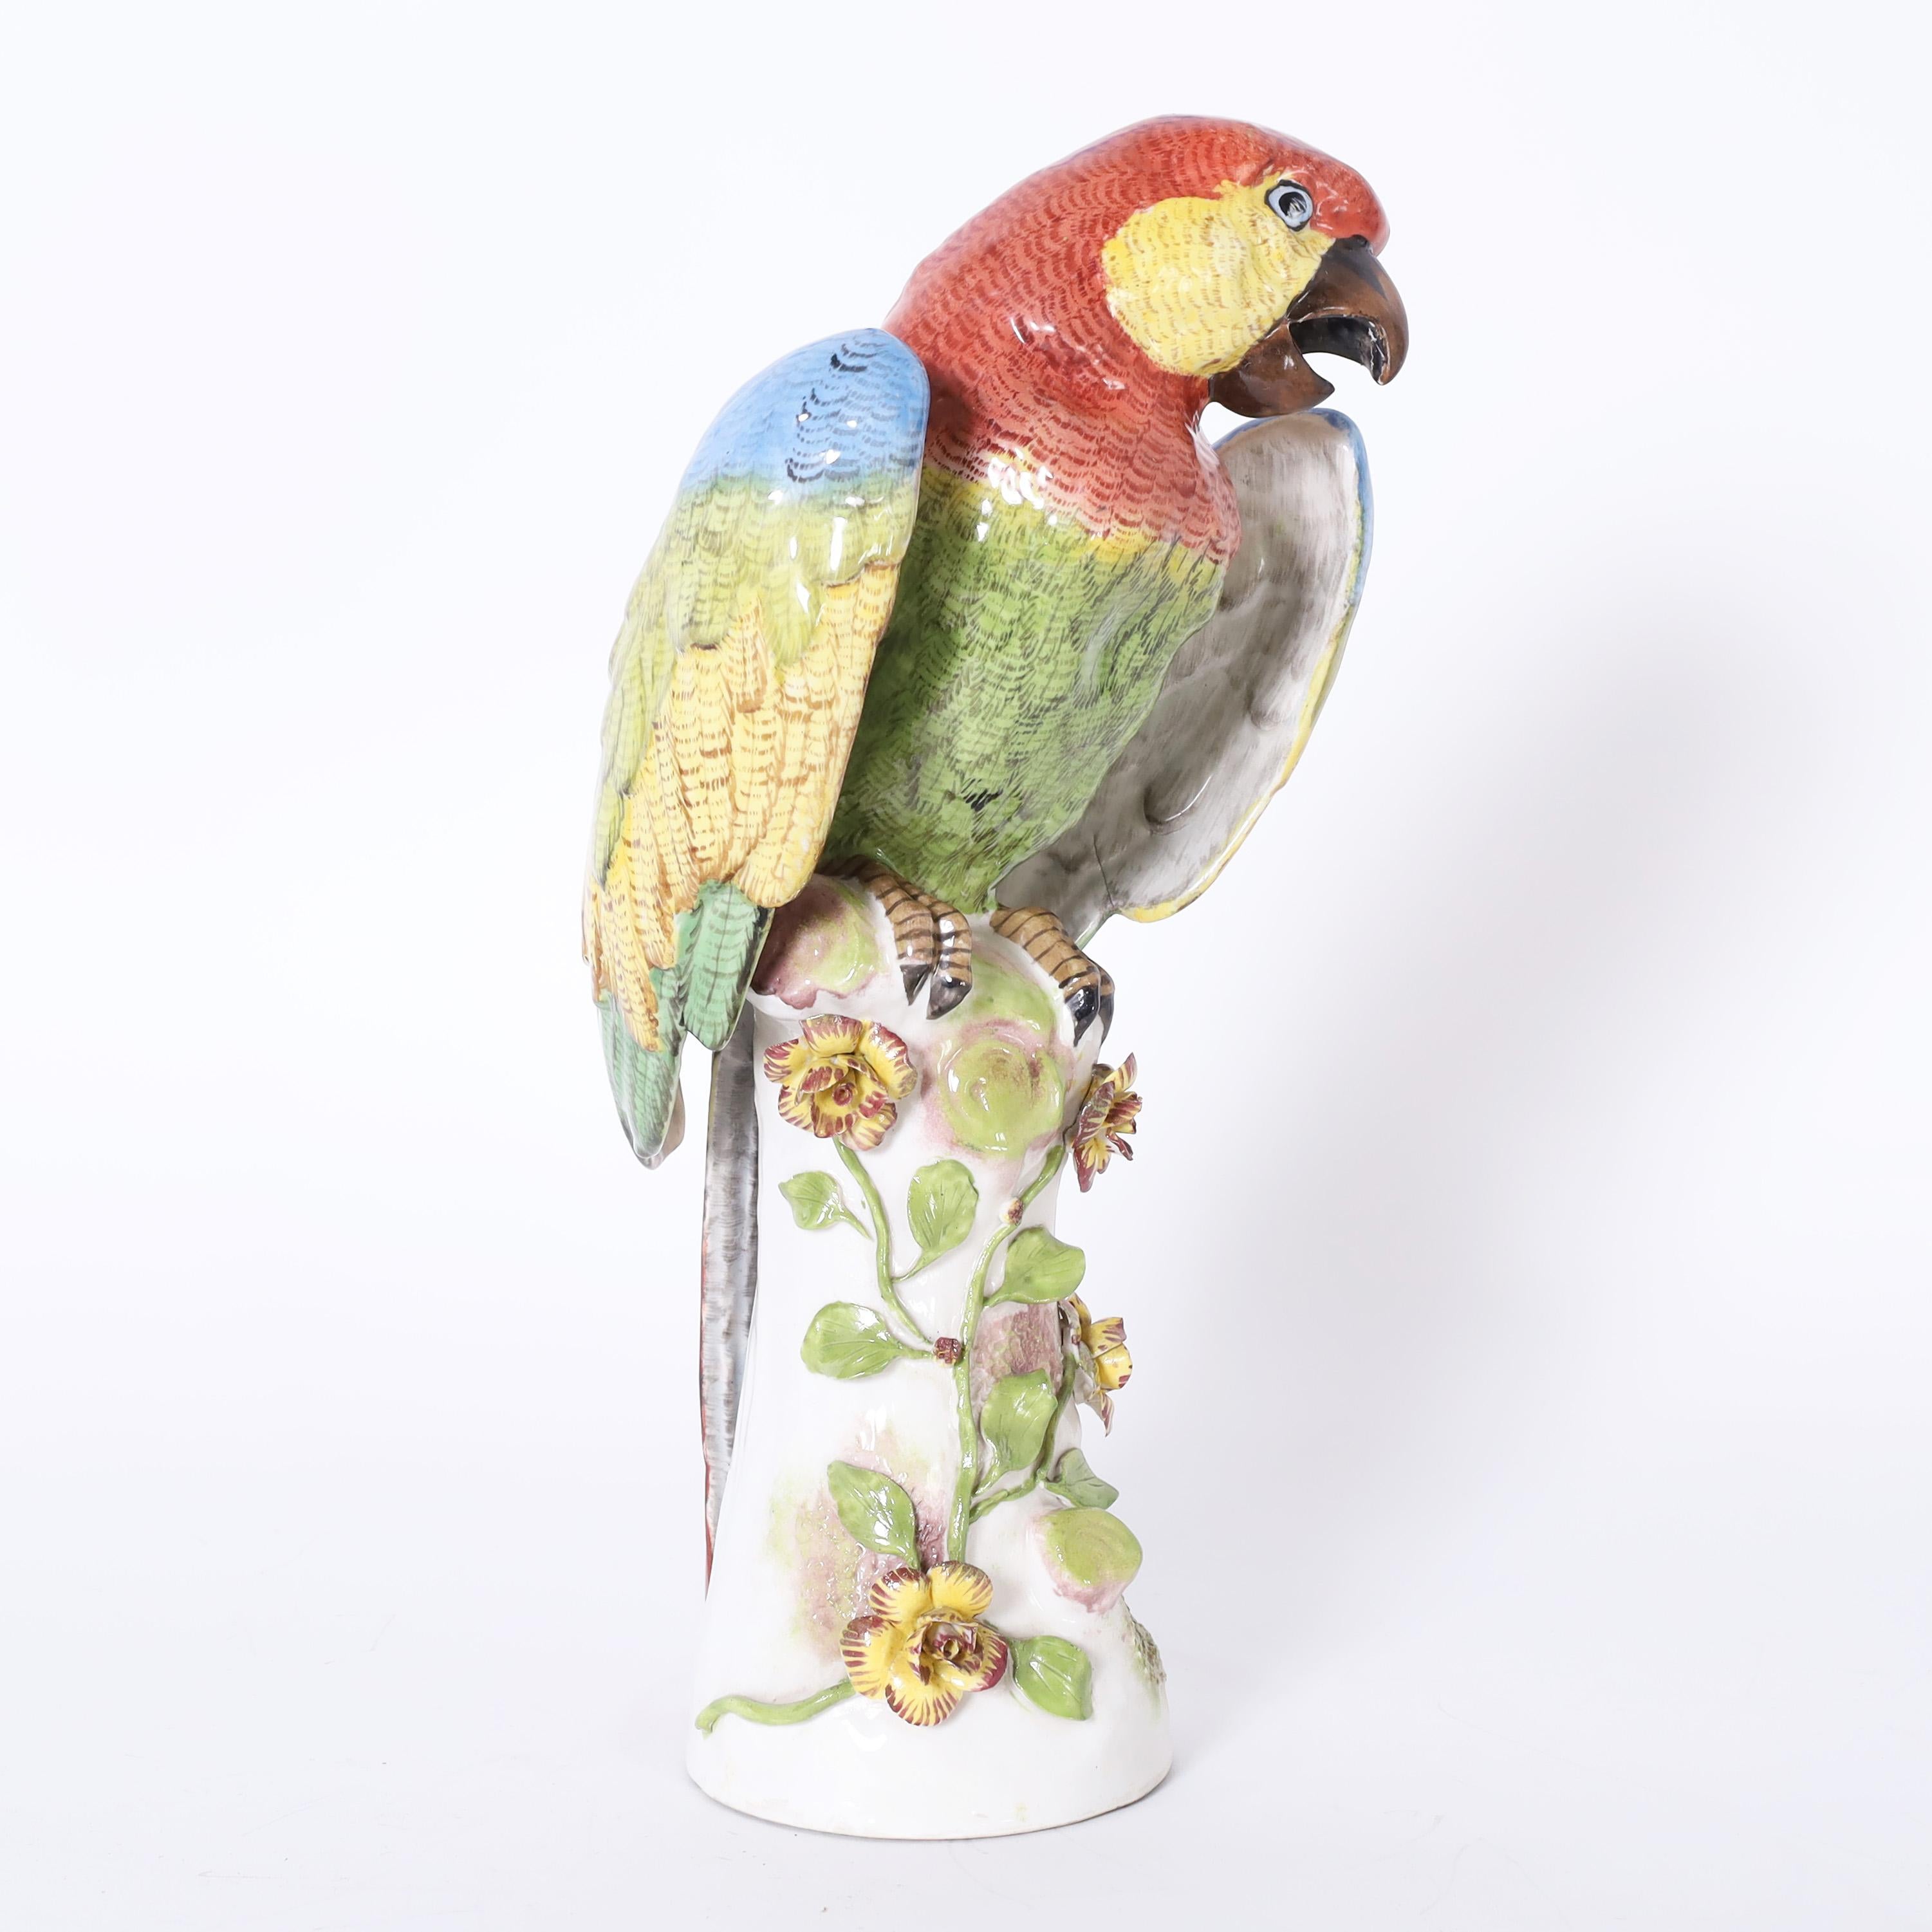 Lofty life size porcelain parrot hand decorated in vivid tropical colors, glazed and perched on a tree trunk. Signed with crossed arrows on the back. 